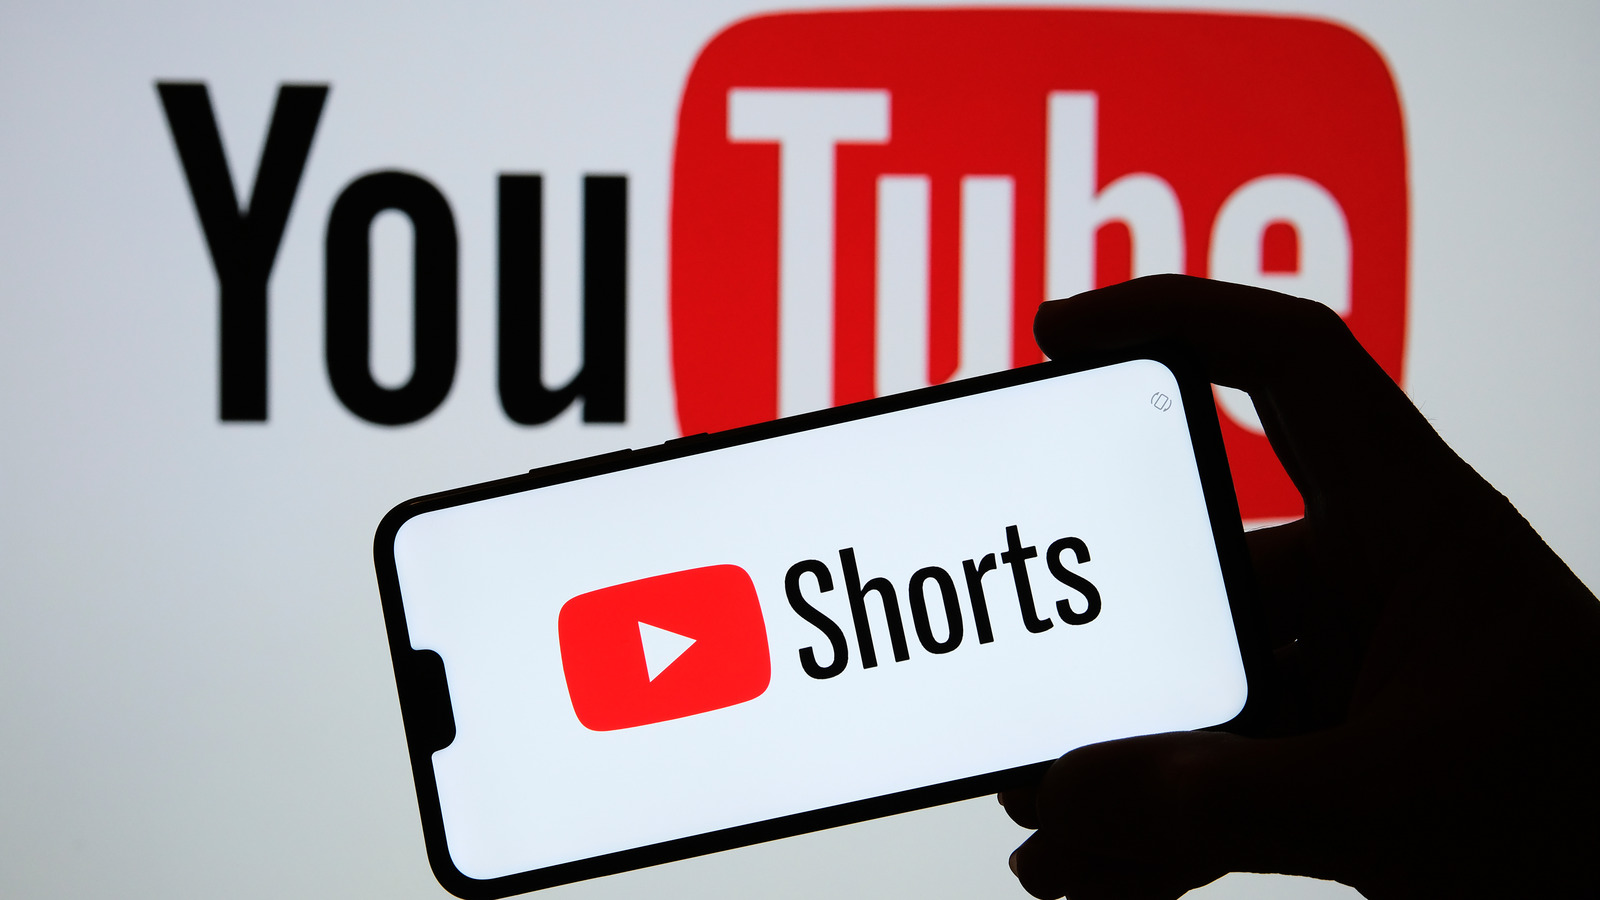 How To Remove YouTube Shorts From Your Home Page